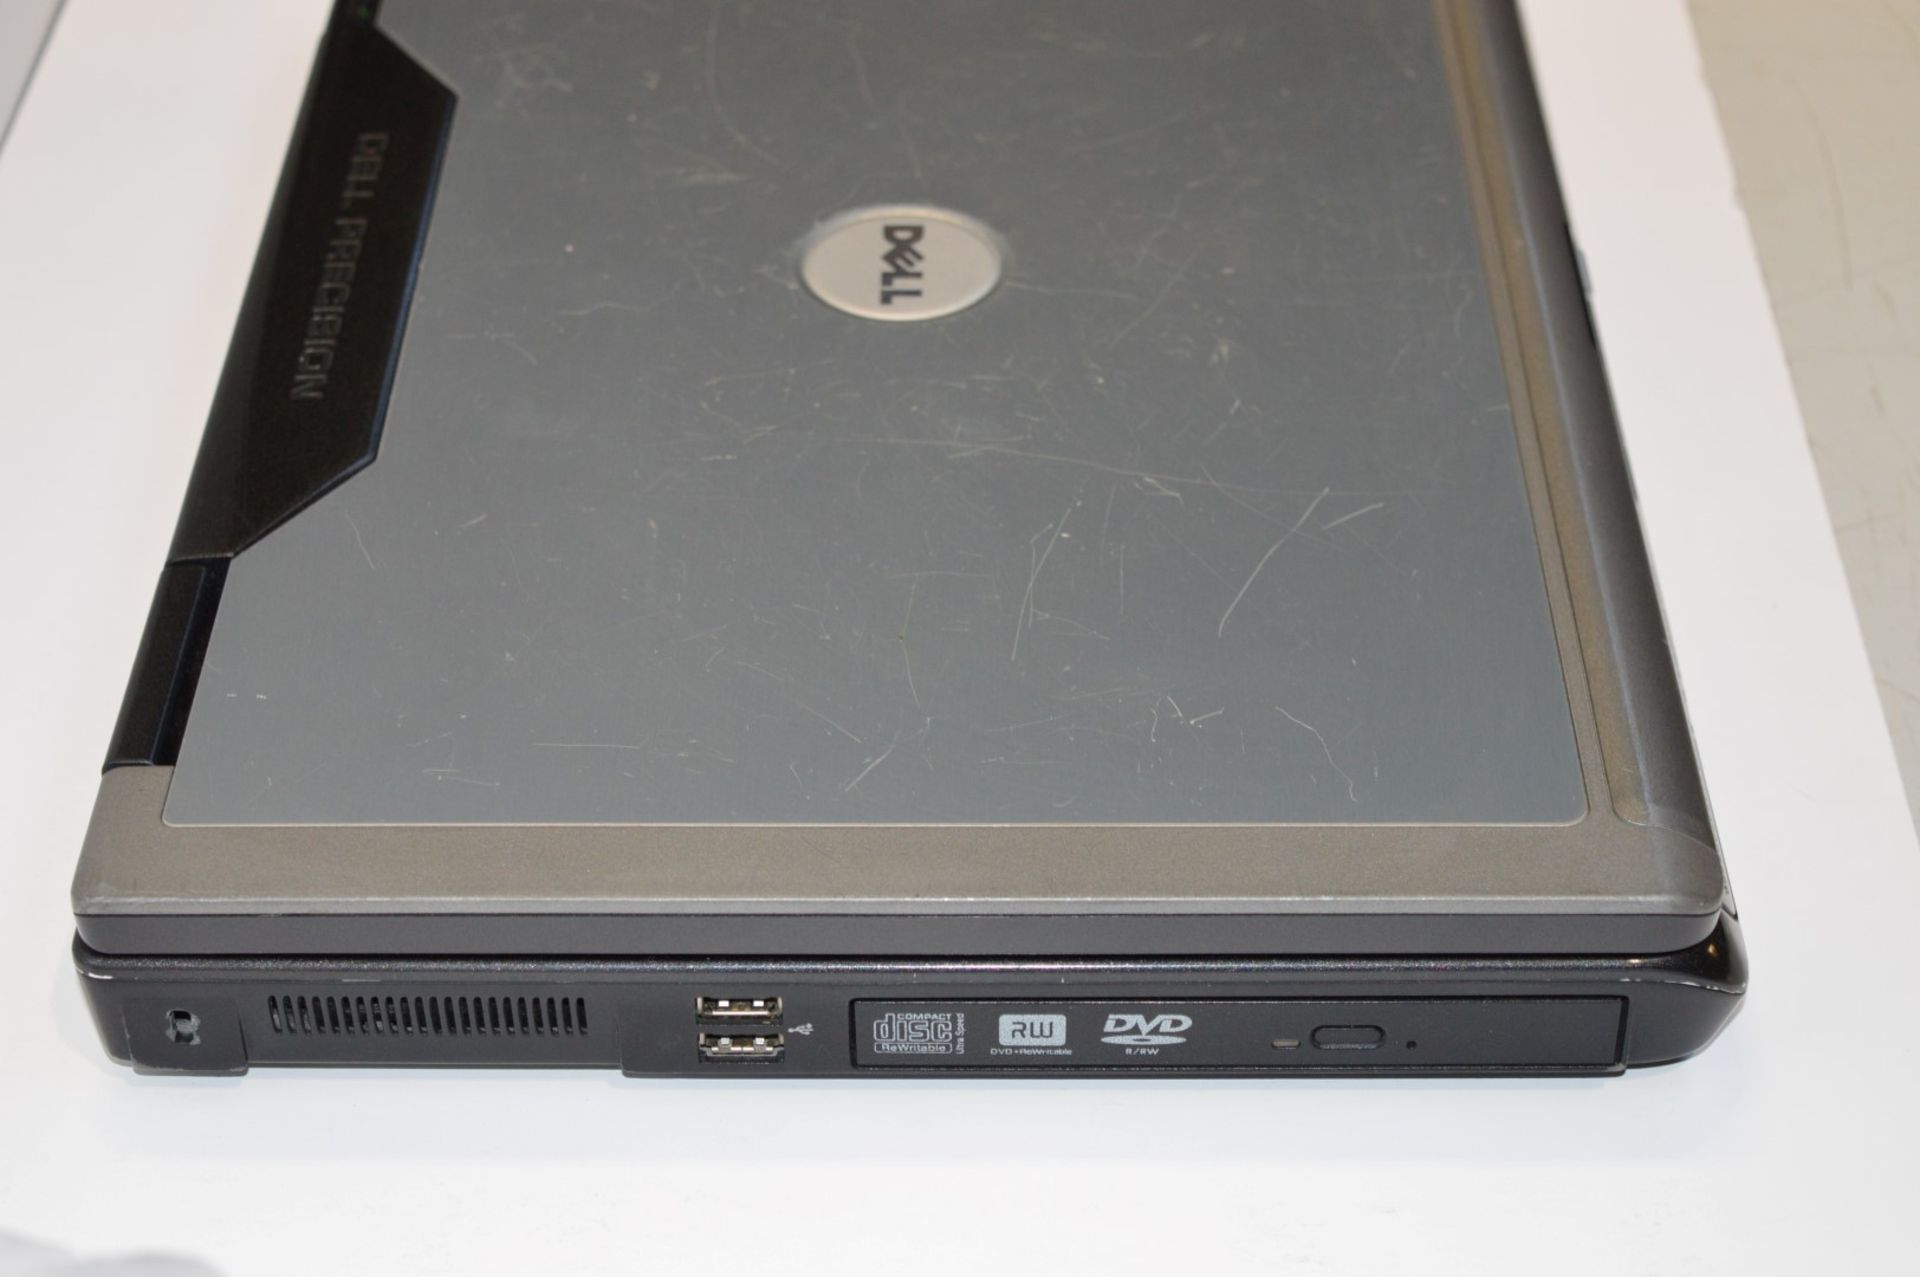 1 x Dell M90 17 Inch Laptop Computer - Features an Intel Core 2 Duo 2.16ghz Processor, 160gb Hard - Image 8 of 12